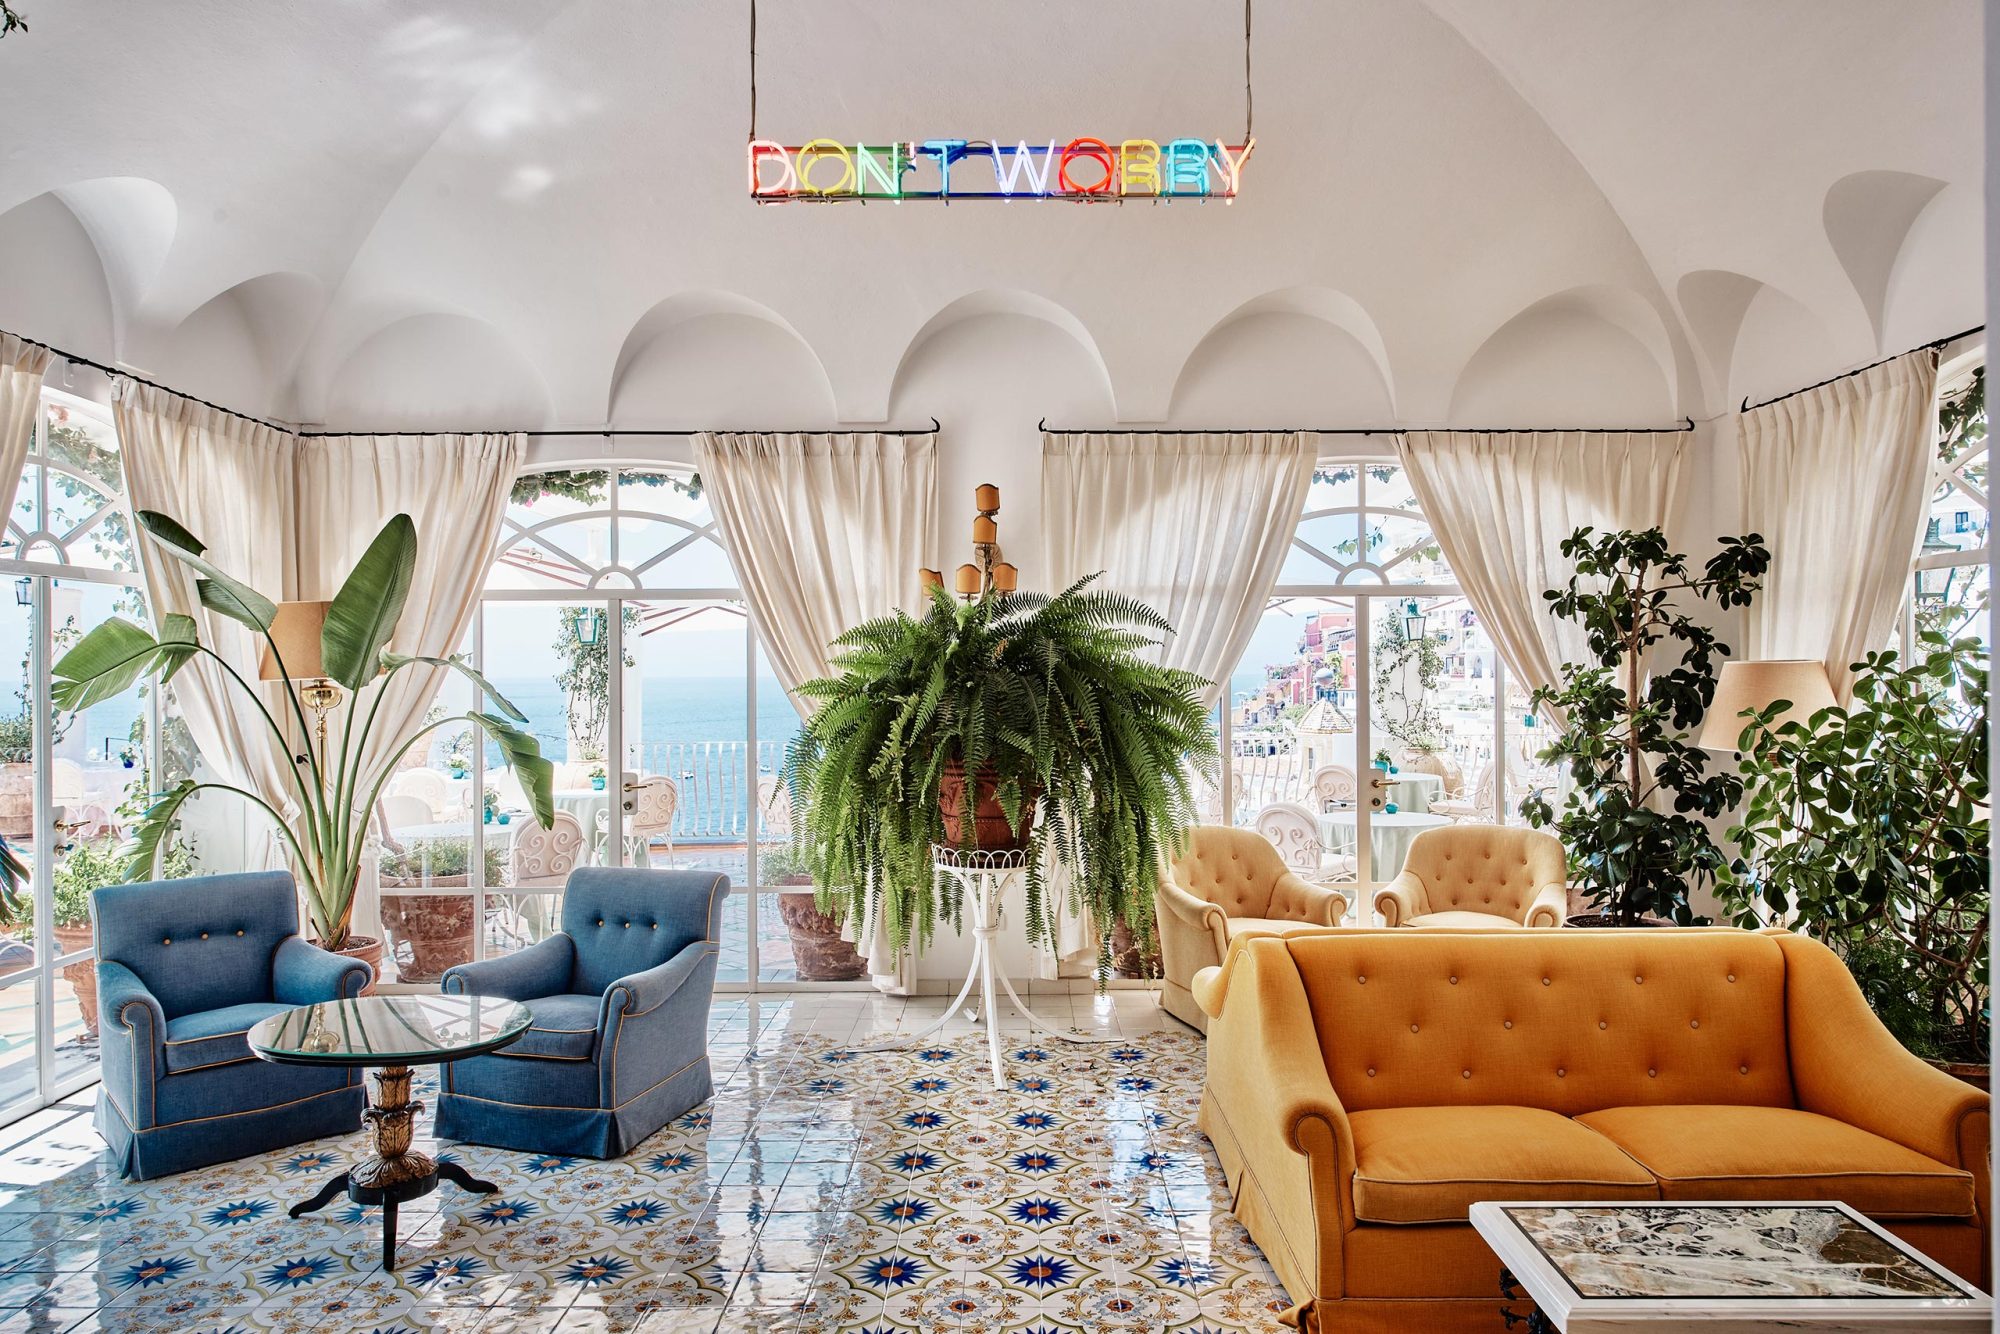 Le Sirenuse: A timeless luxury retreat in the heart of Positano